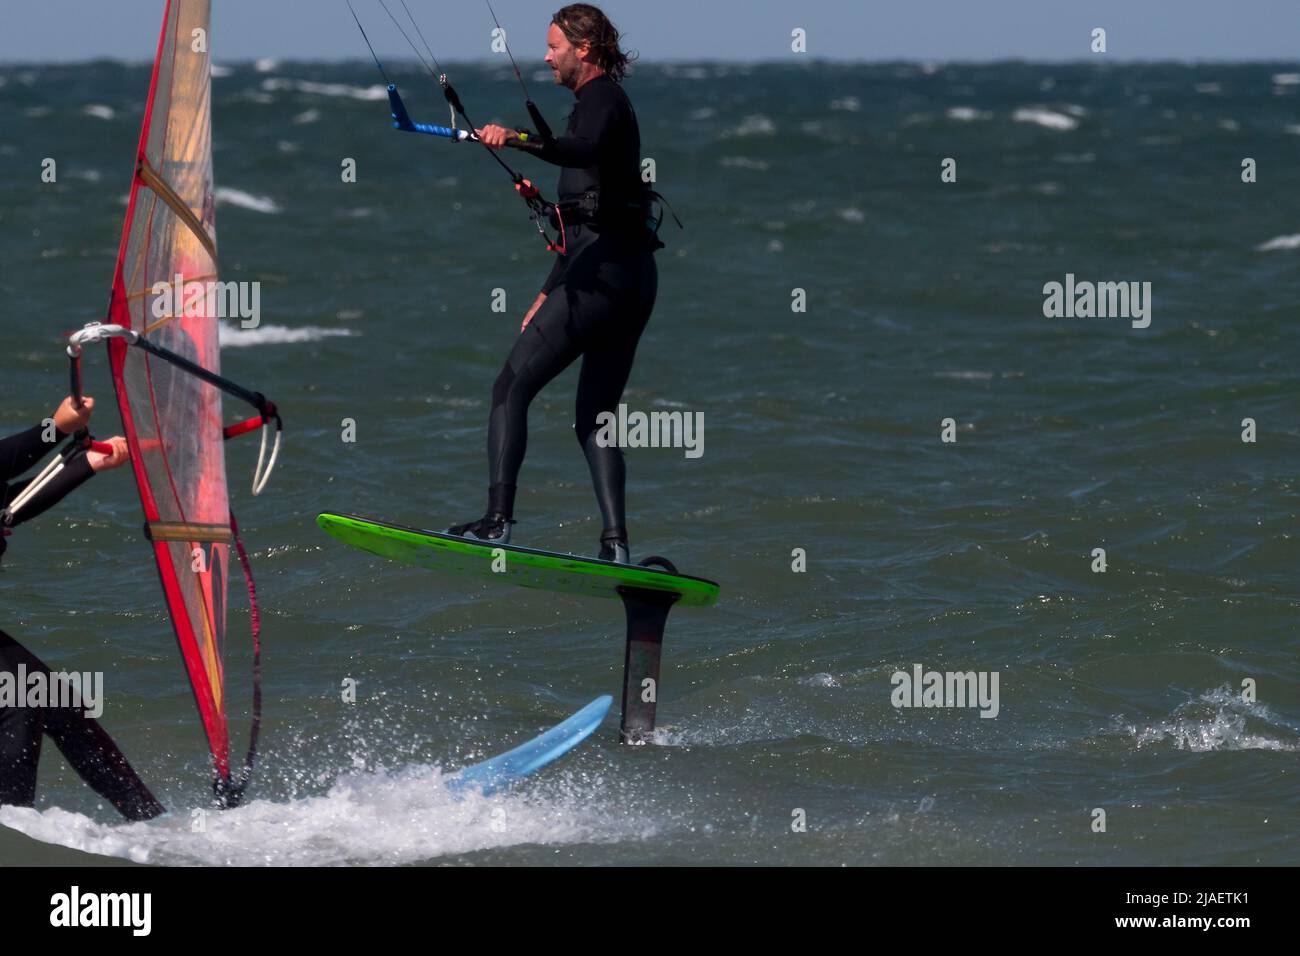 Almost accident between Kite Foil Surfer and Wind Surfer, close-up Stock Photo